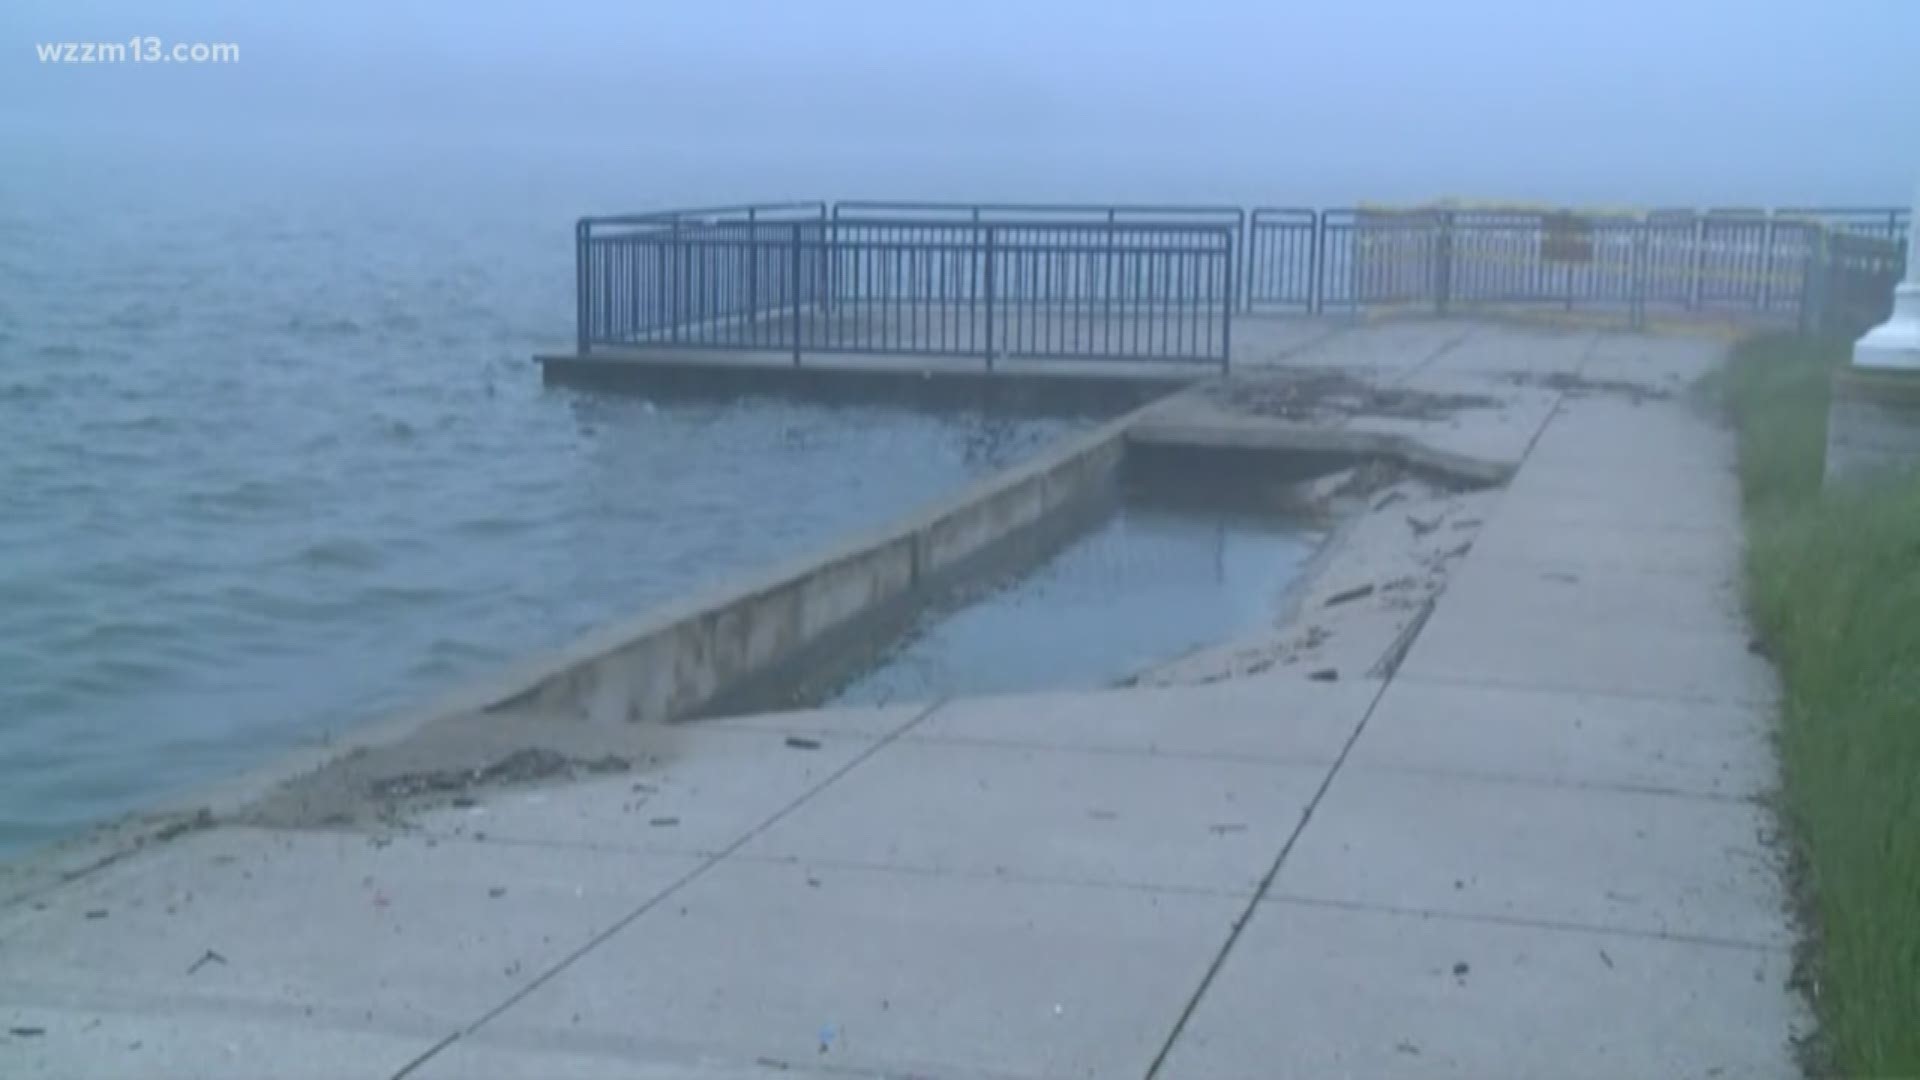 Officials say high Great Lakes water levels likely are to blame for damage to a seawall at Kollen Park in Holland.